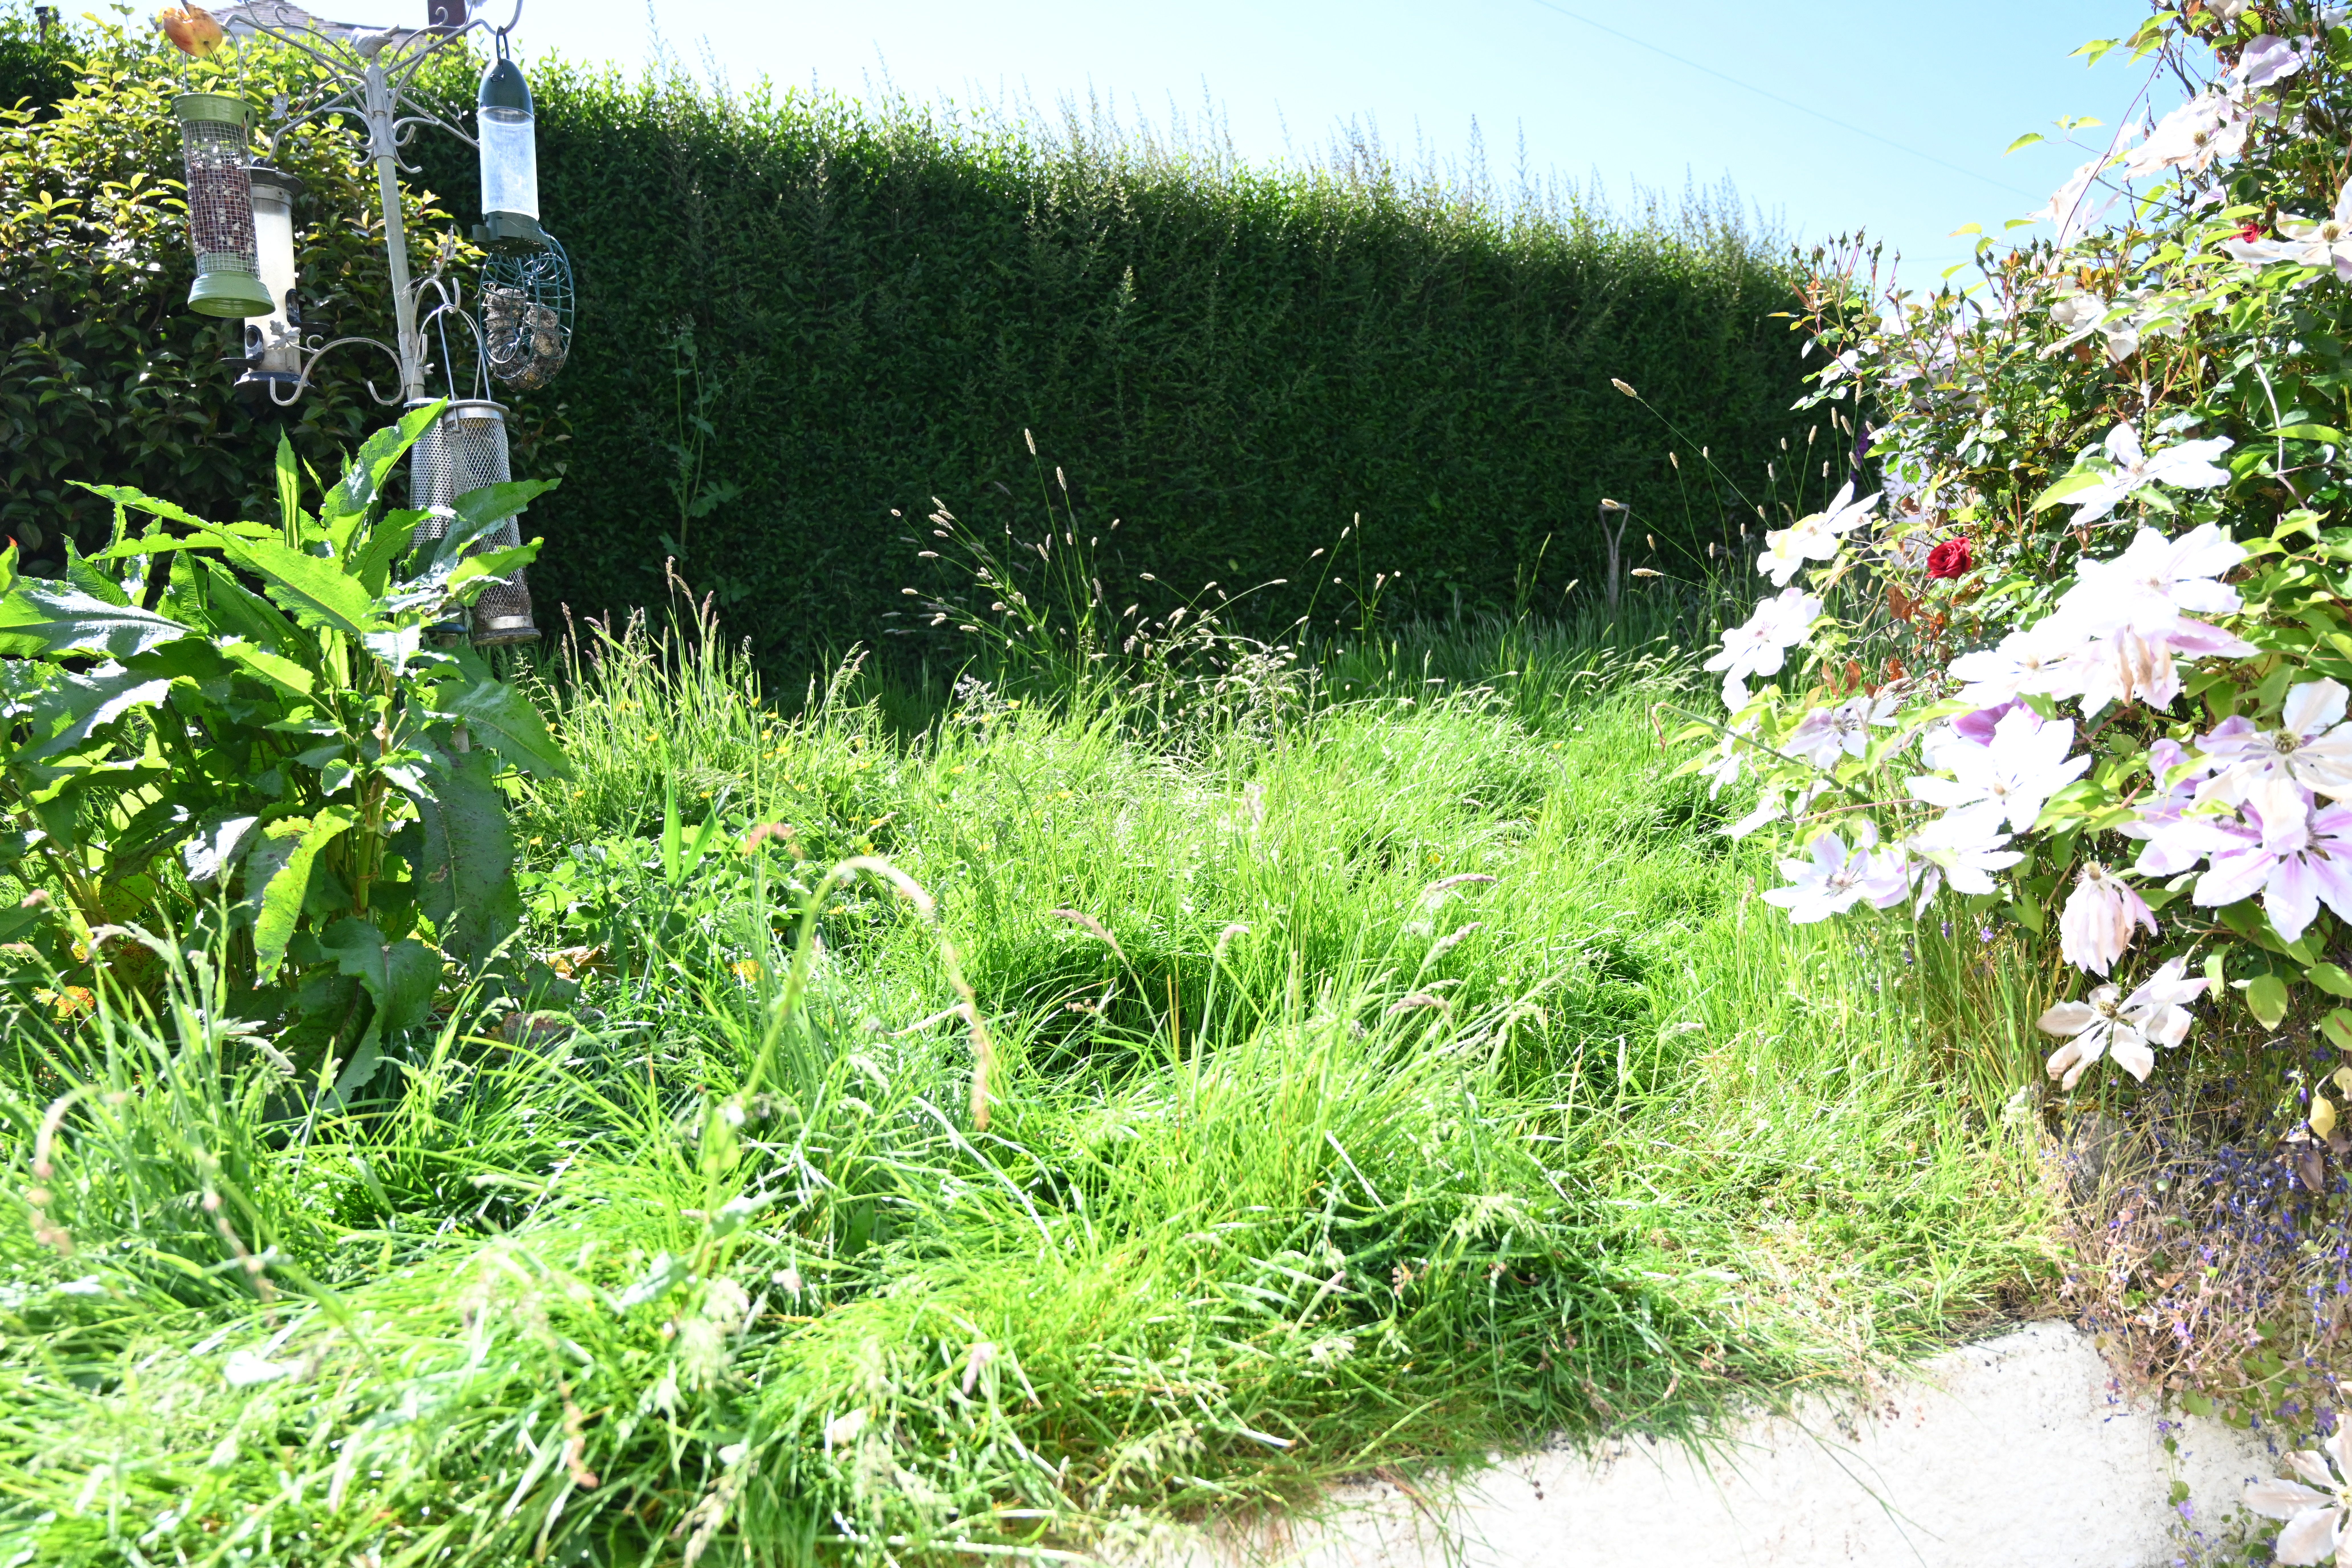 RAMPANT: No-Mow May is a godsend for nature in Dúlra’s garden – but a lawnmower just won’t suffice for the early June job